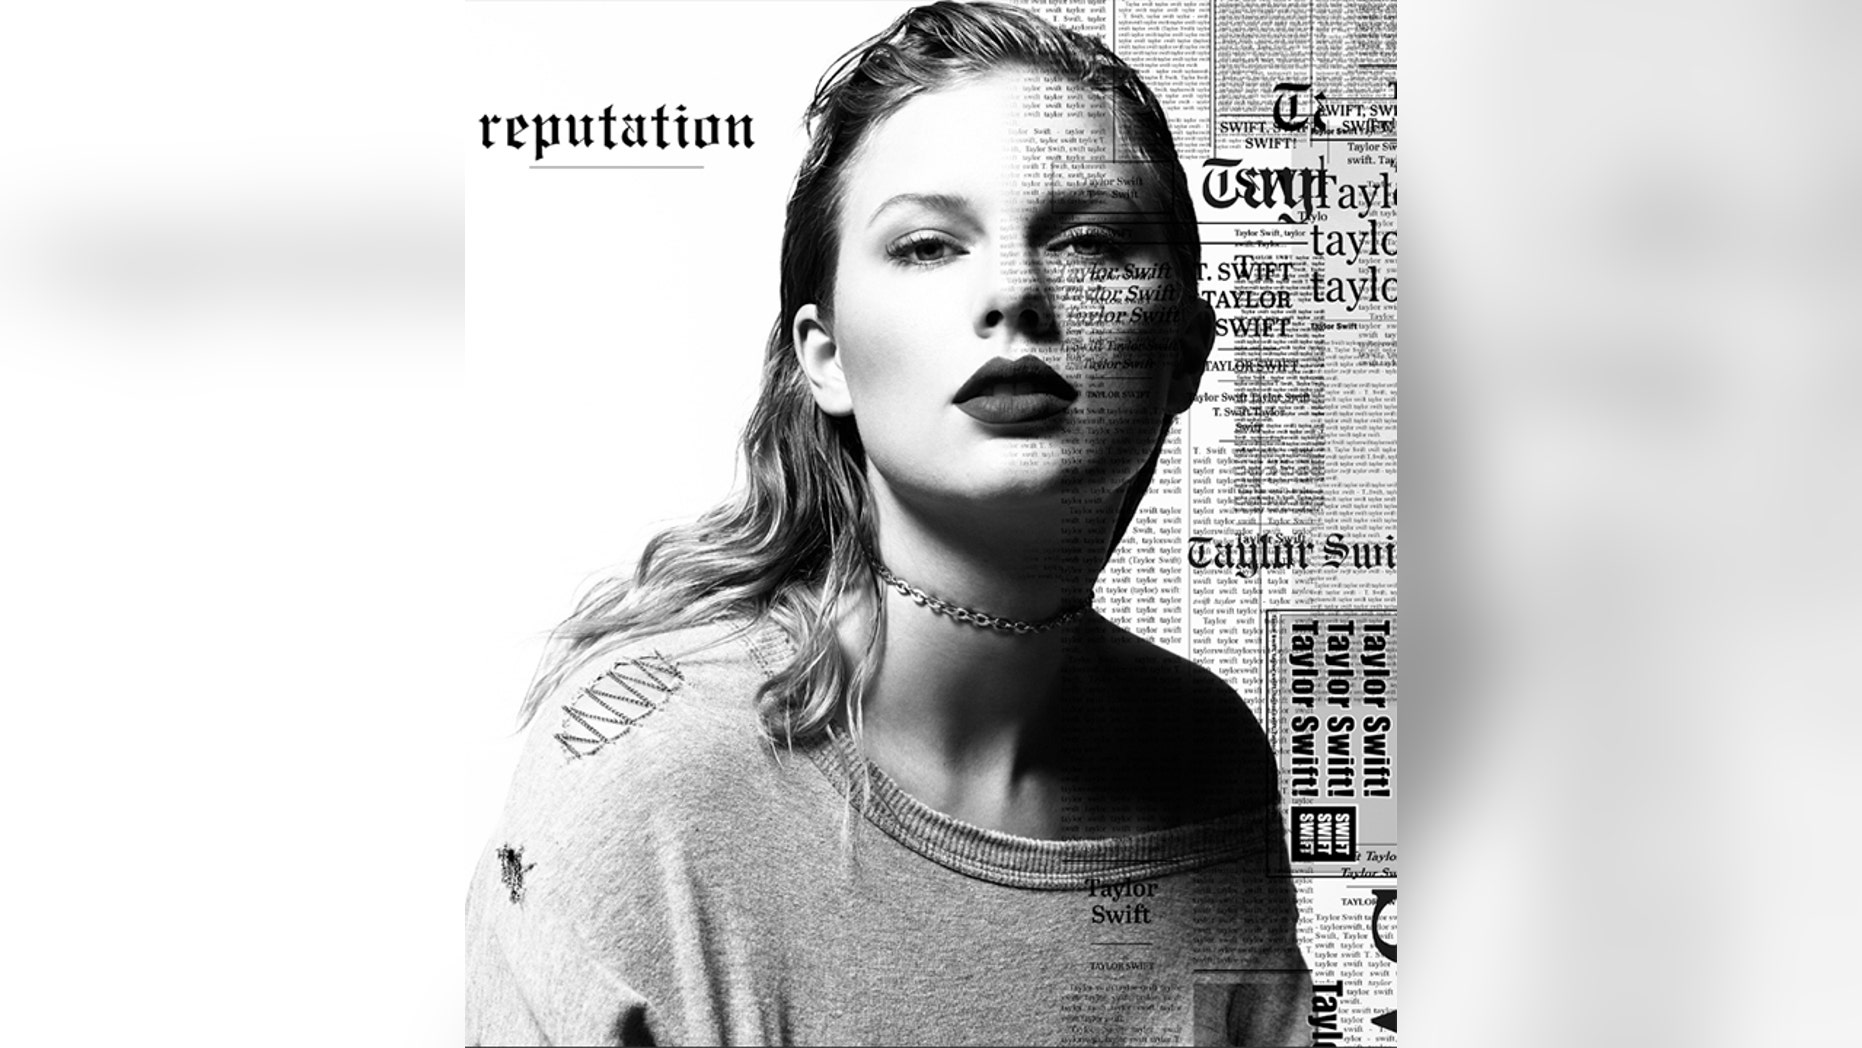 Taylor Swift's 'Reputation' album cover ripped by fans | Fox News